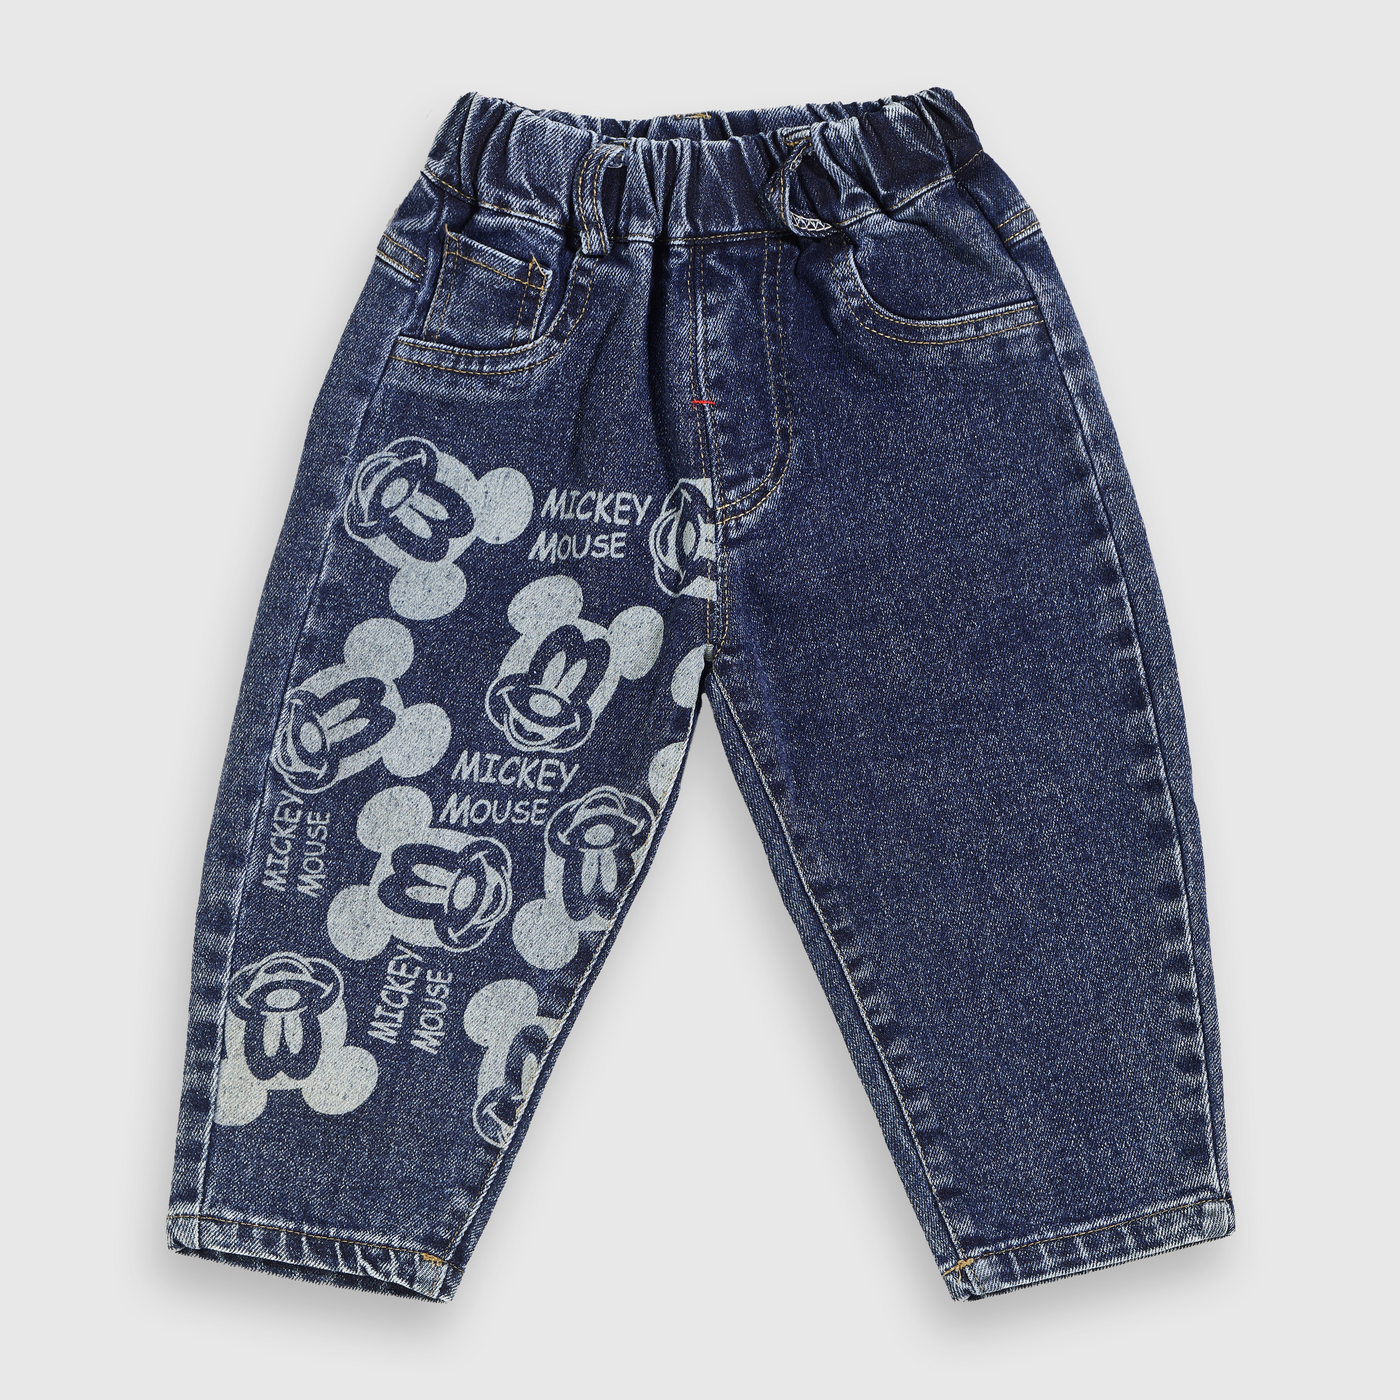 MICKEY MOUSE PANTS